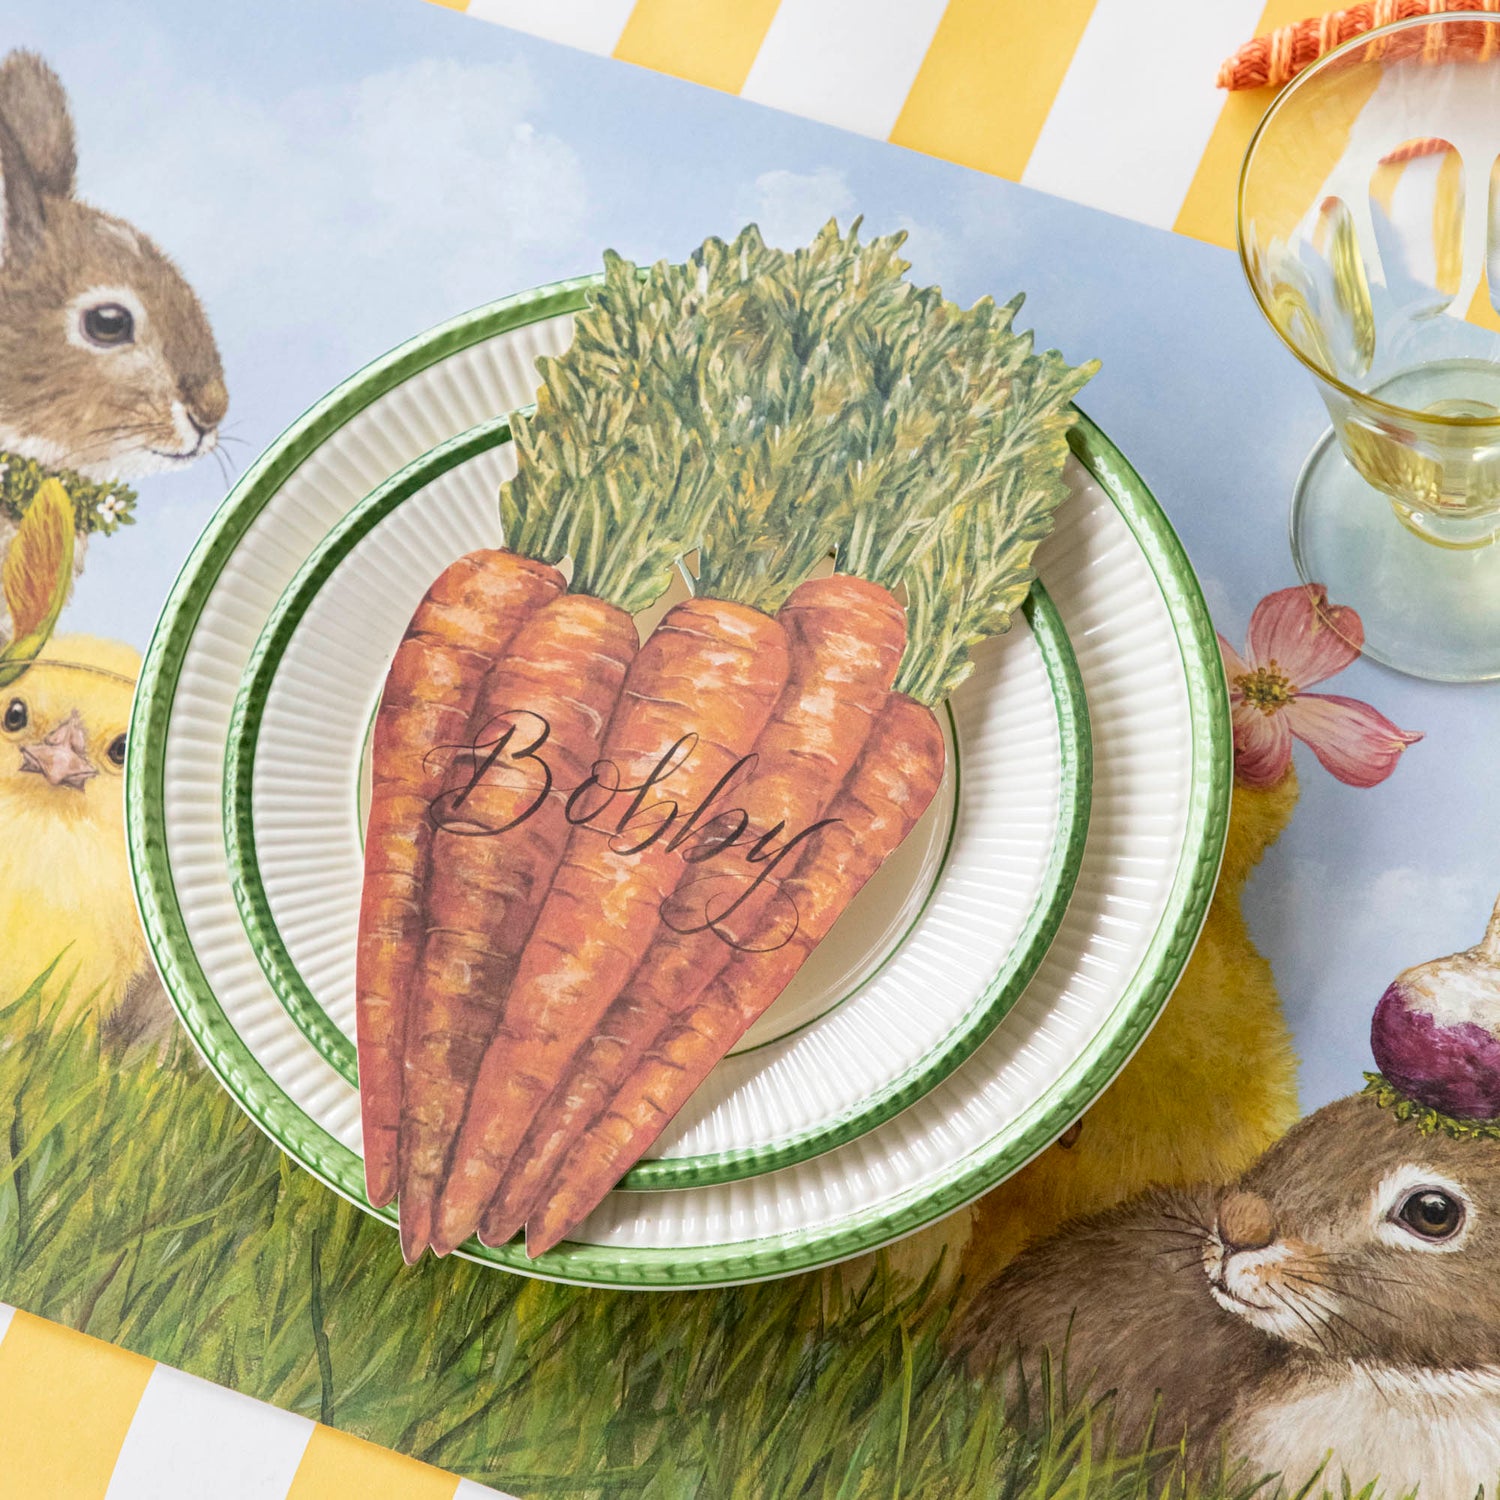 A Carrots Table Accent labeled &quot;Bobby&quot; resting on the plate of a springtime place setting.